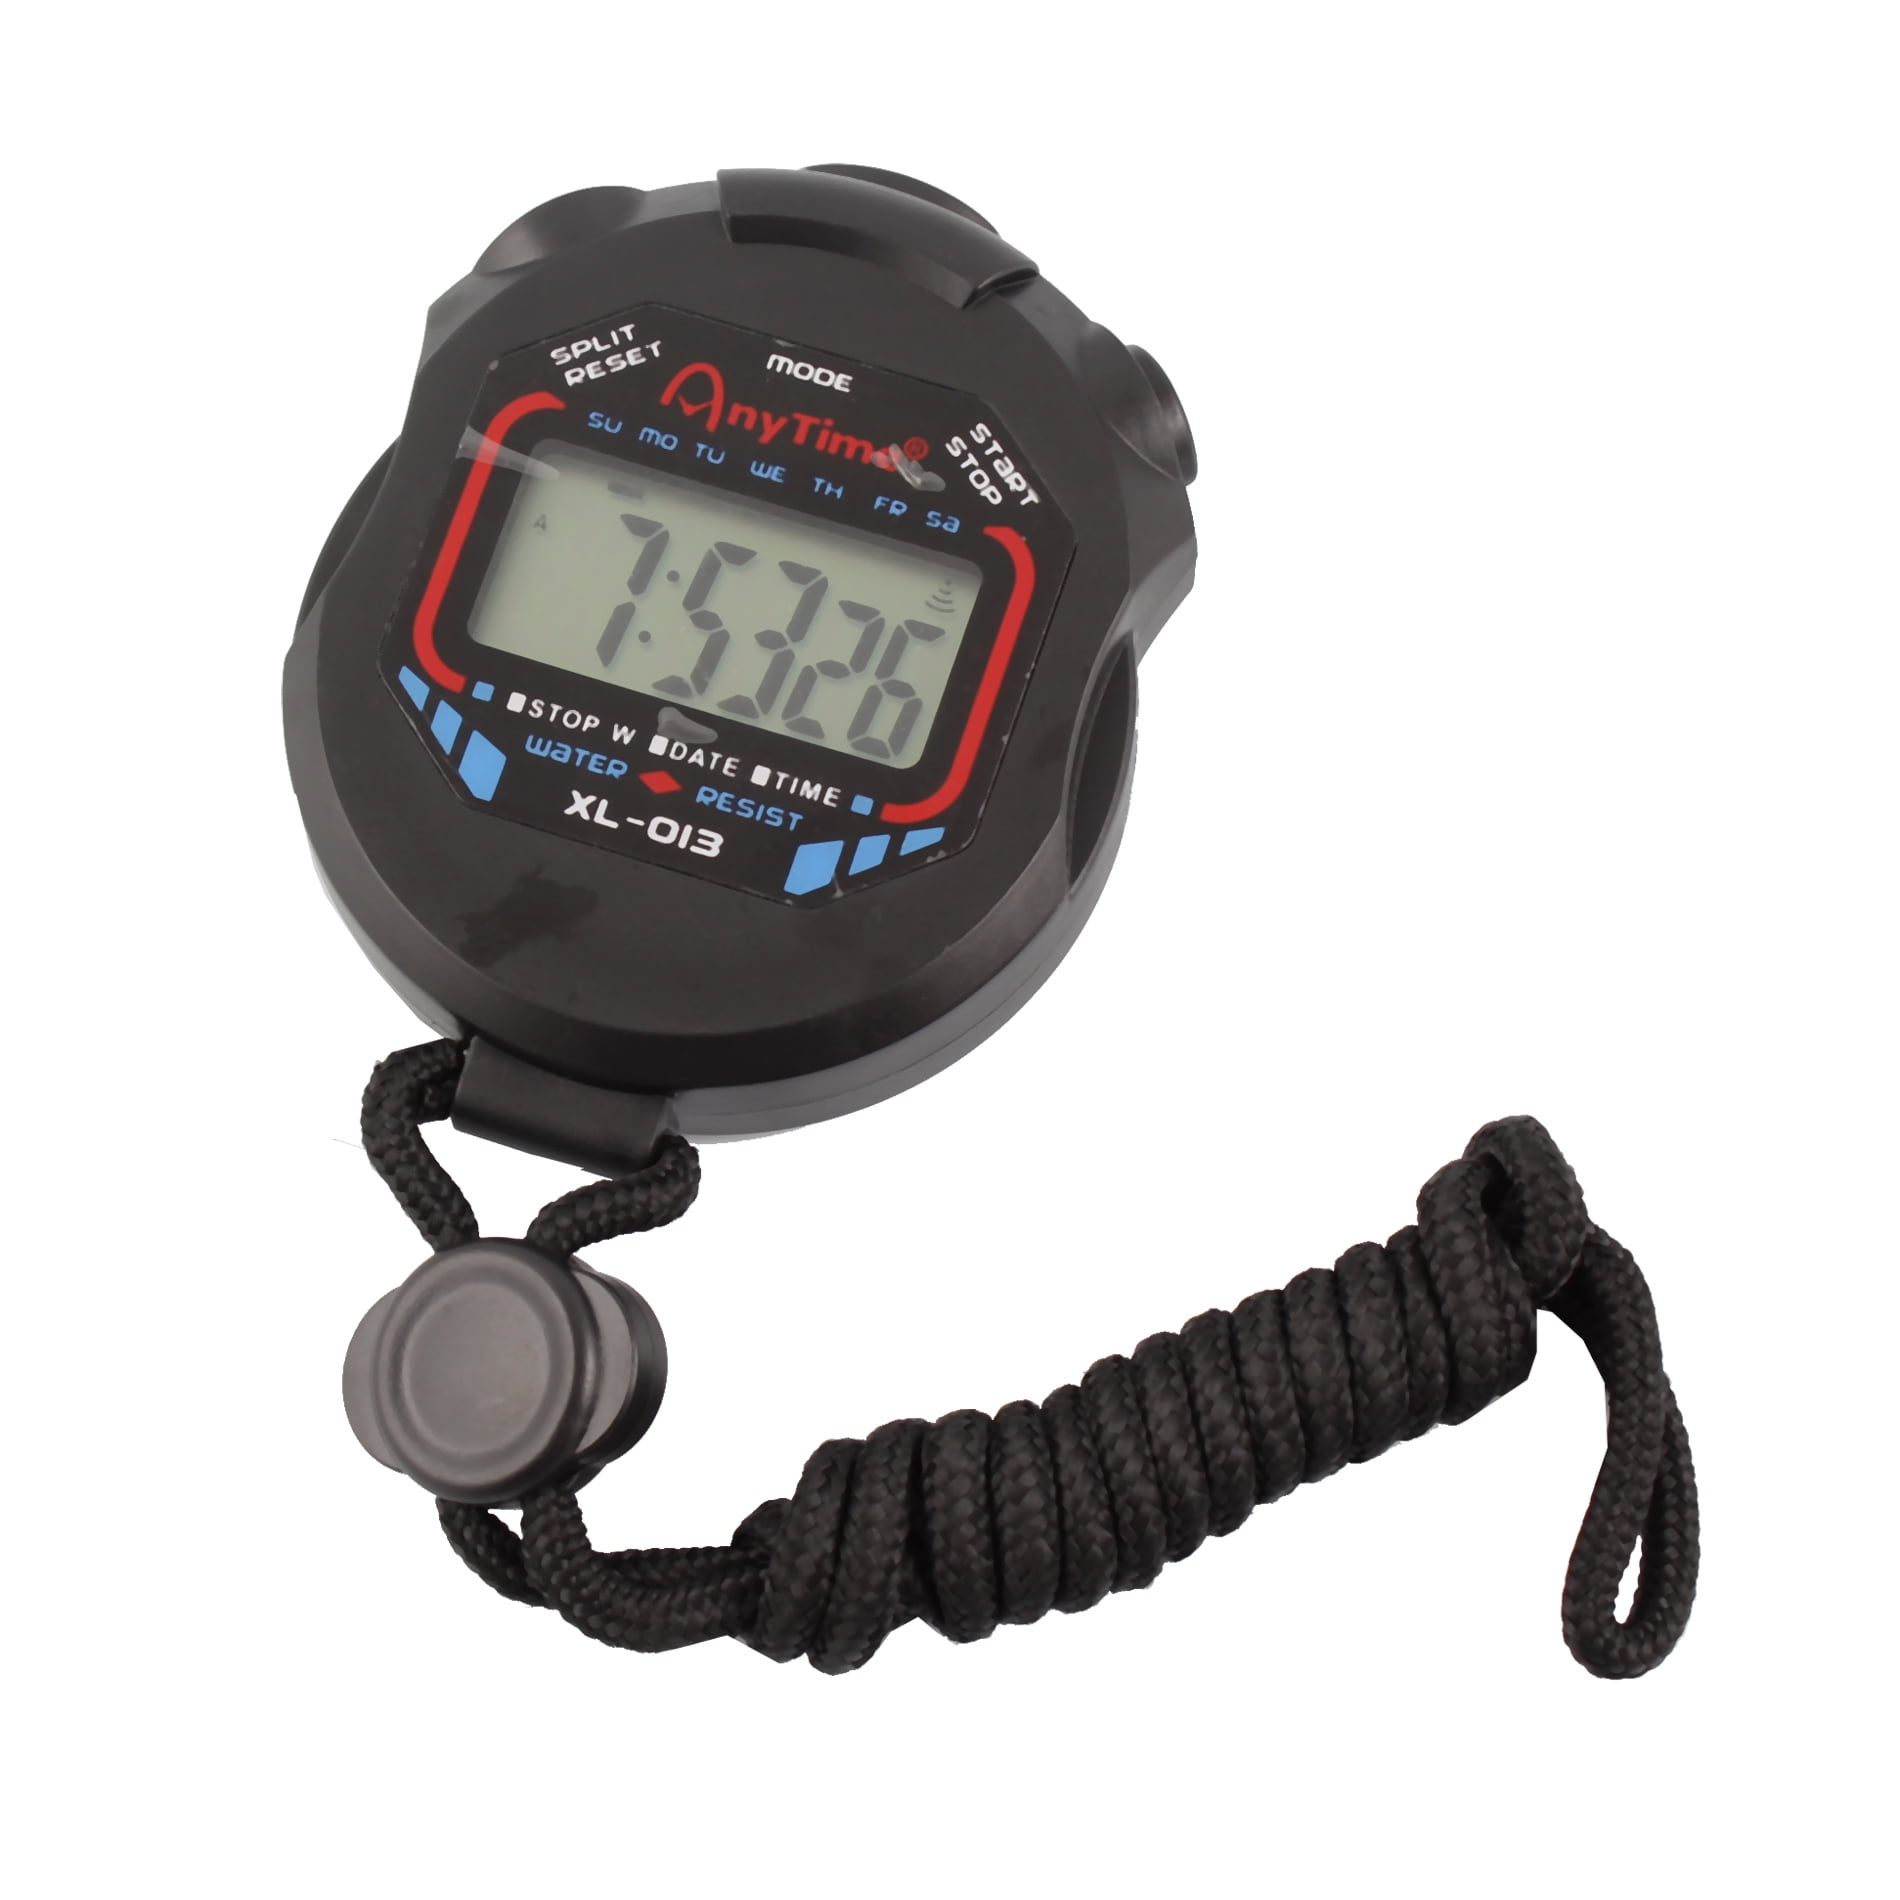 Large LCD Handheld Stopwatch Sports Timer Battery Included UK Stock 